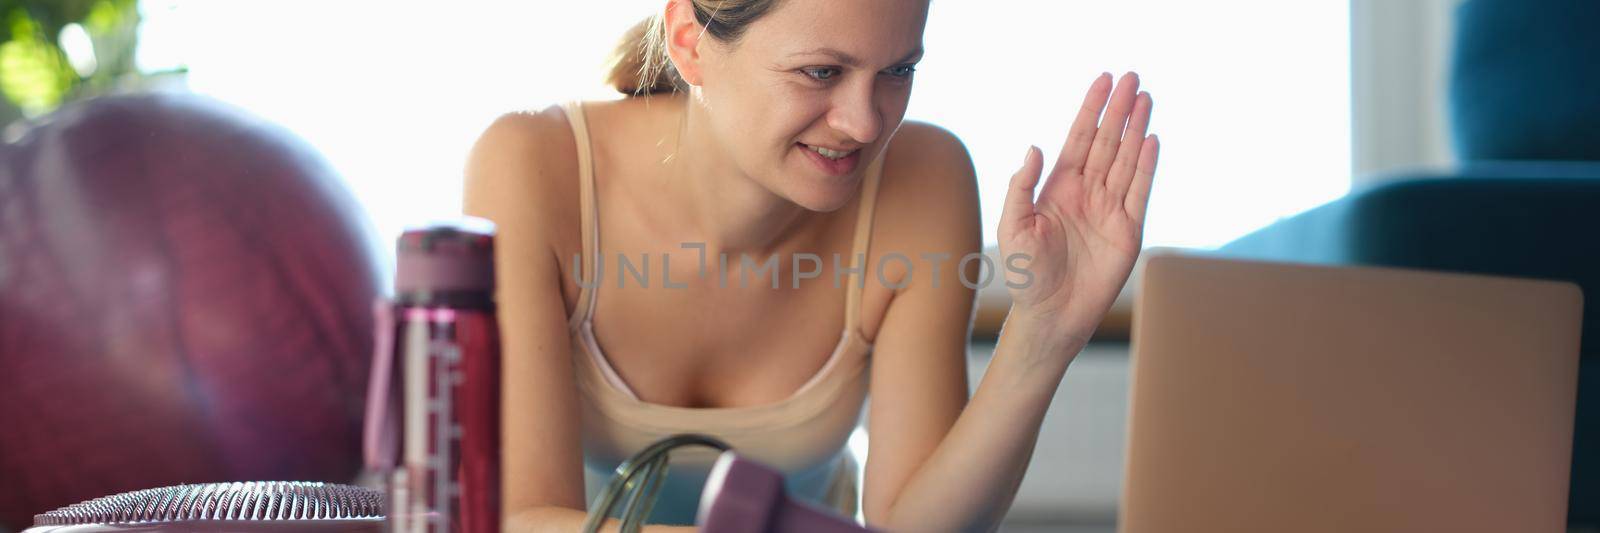 Smiling woman greets fitness trainer through laptop monitor by kuprevich